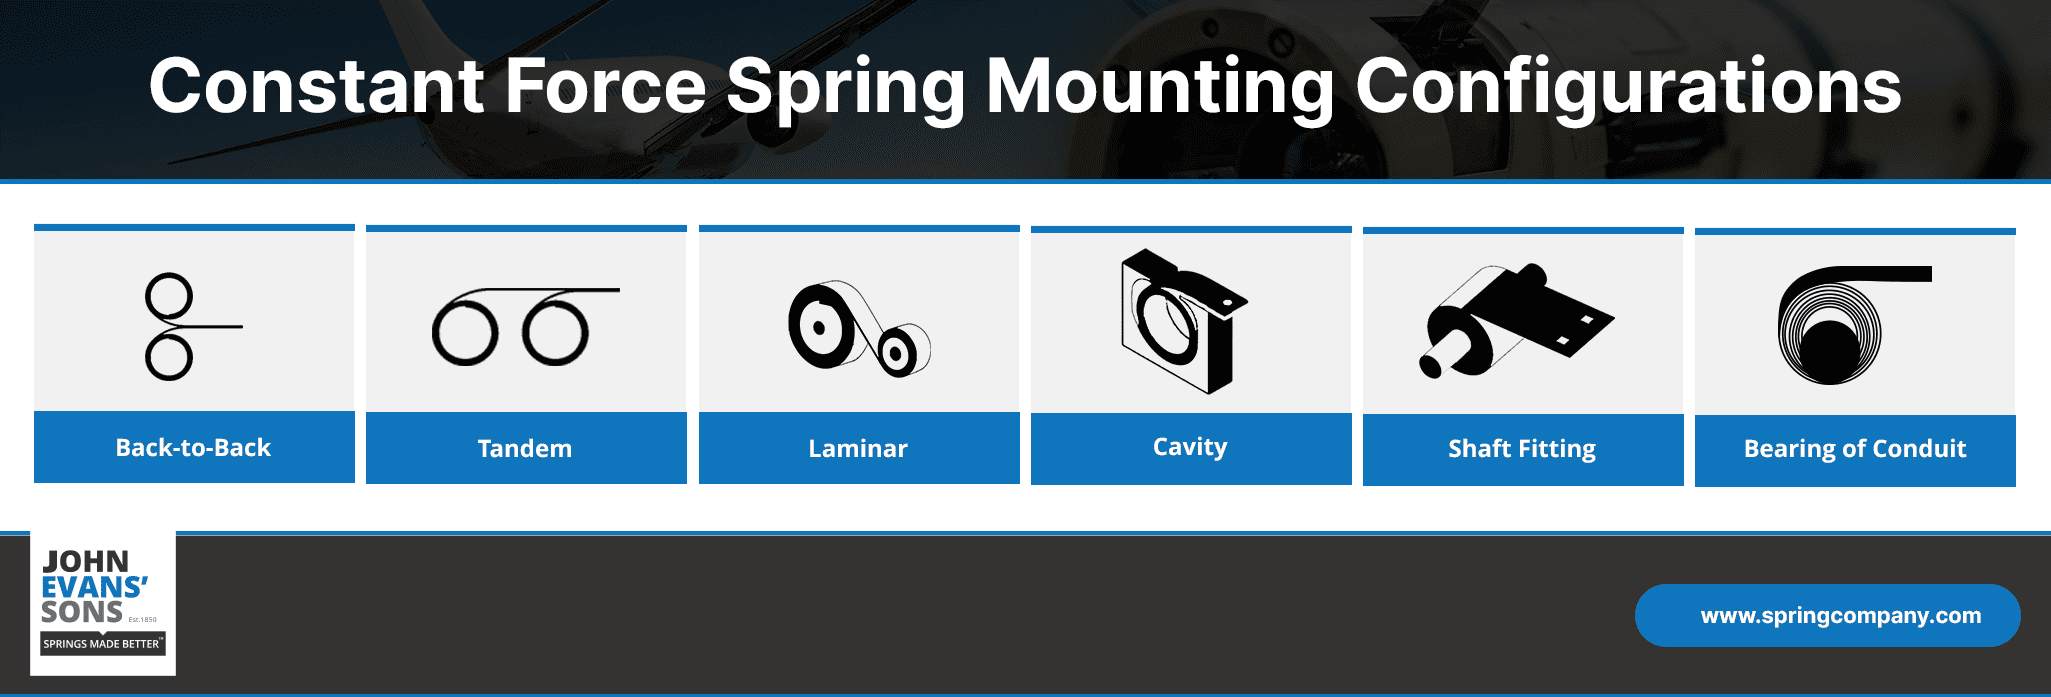 Constant Force Spring Mounting Configurations